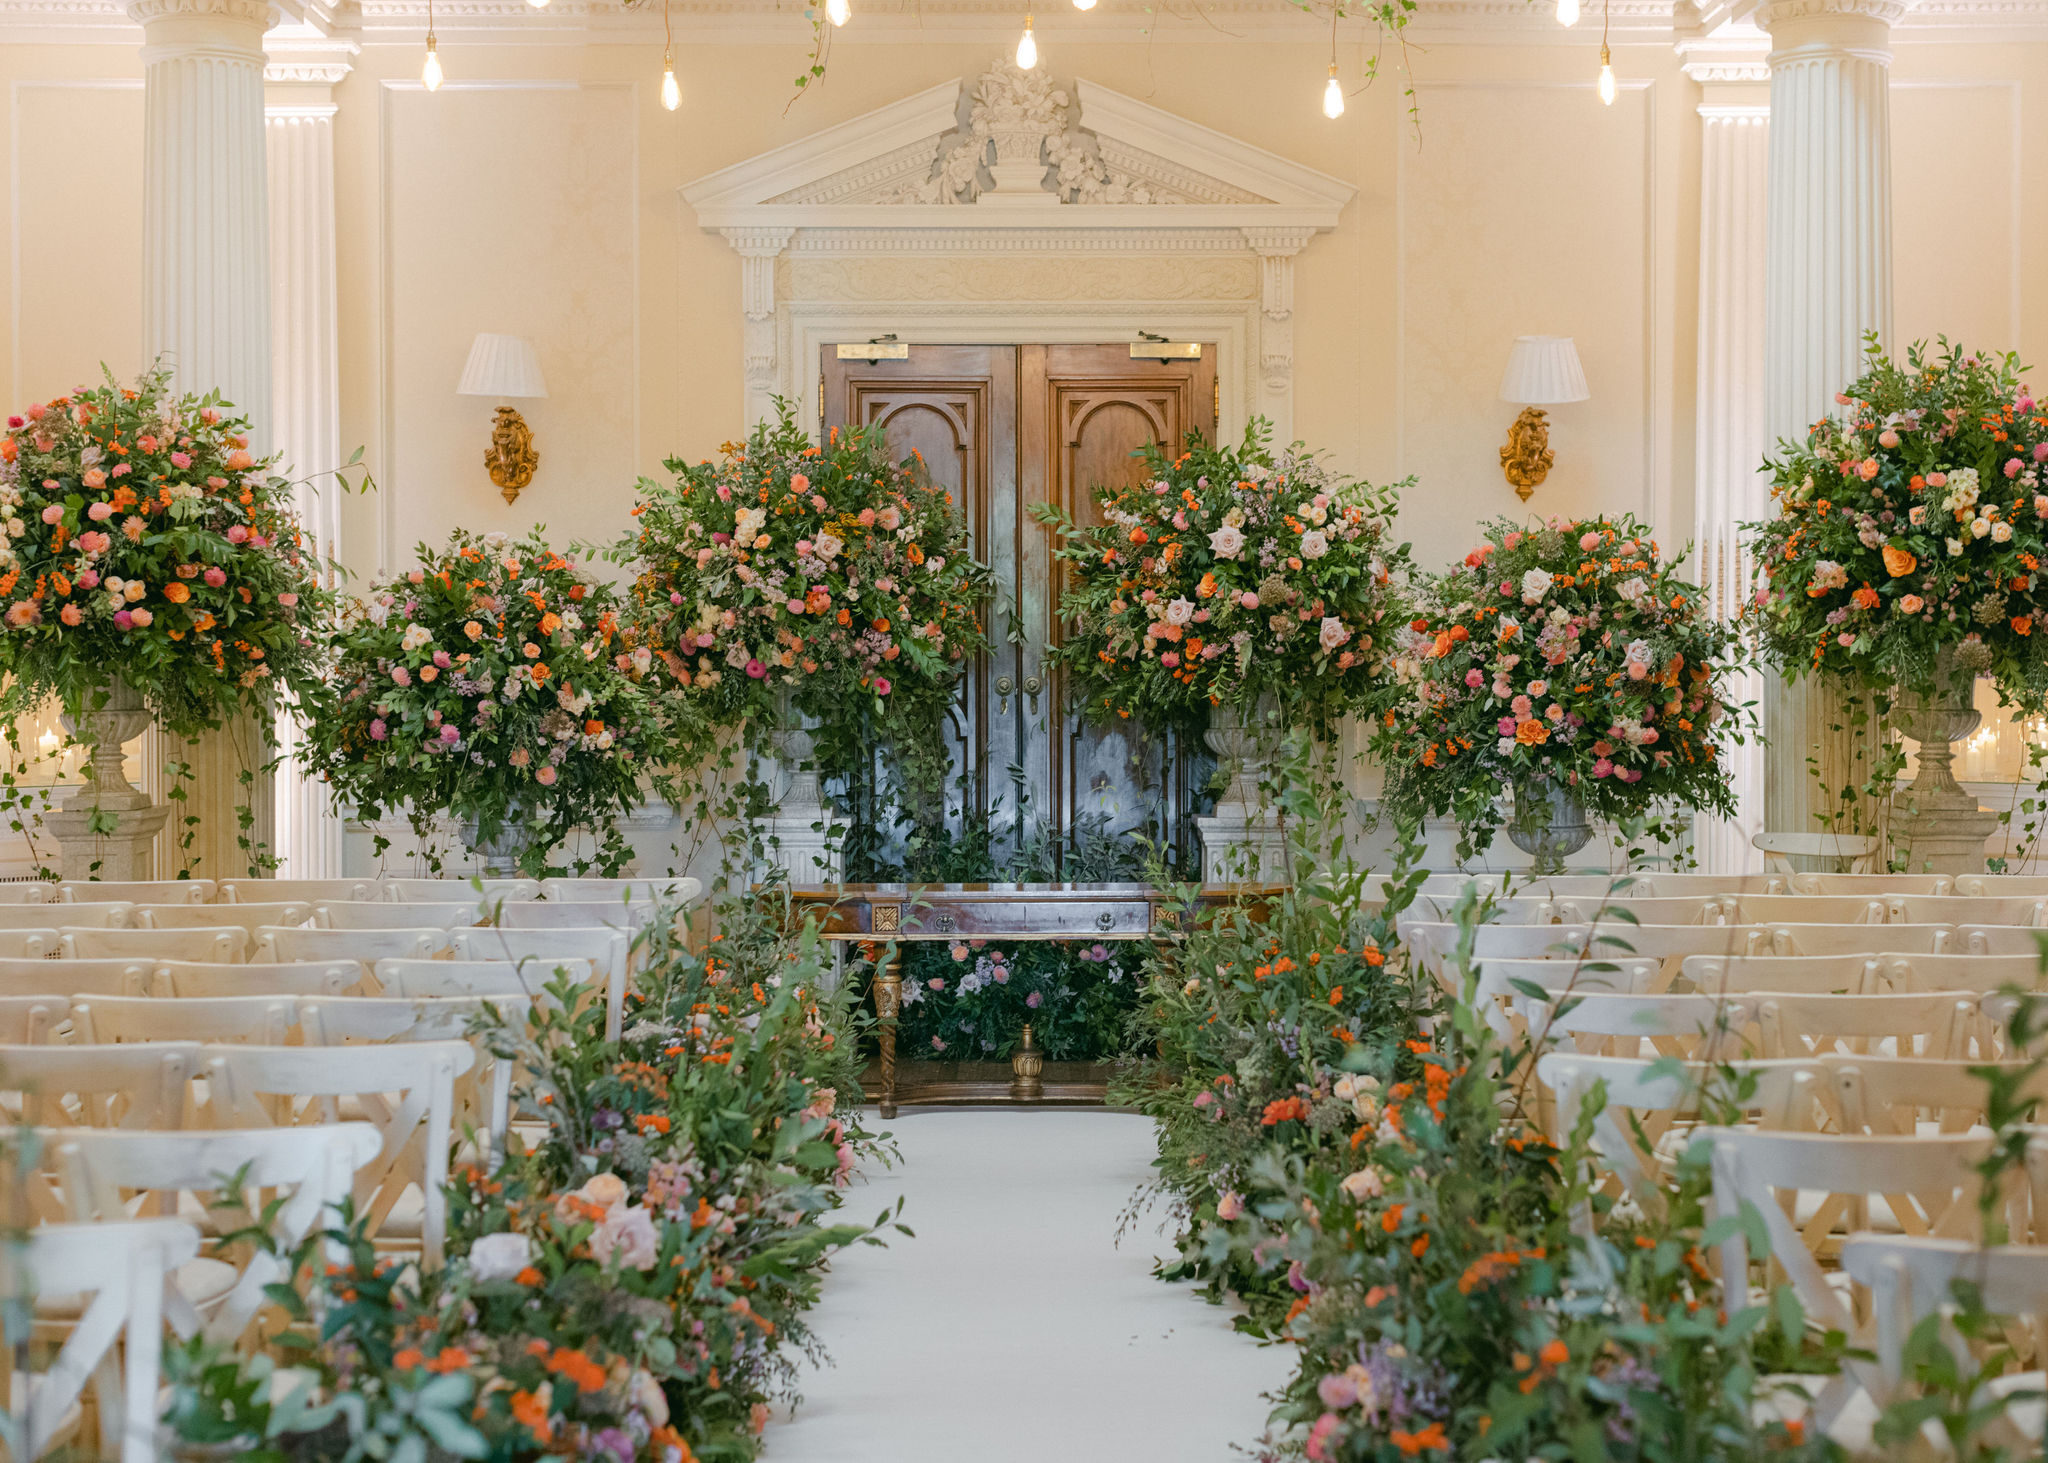 Ceremony set up at Hedsor House filled with a mass of autumnal flowers and foliage